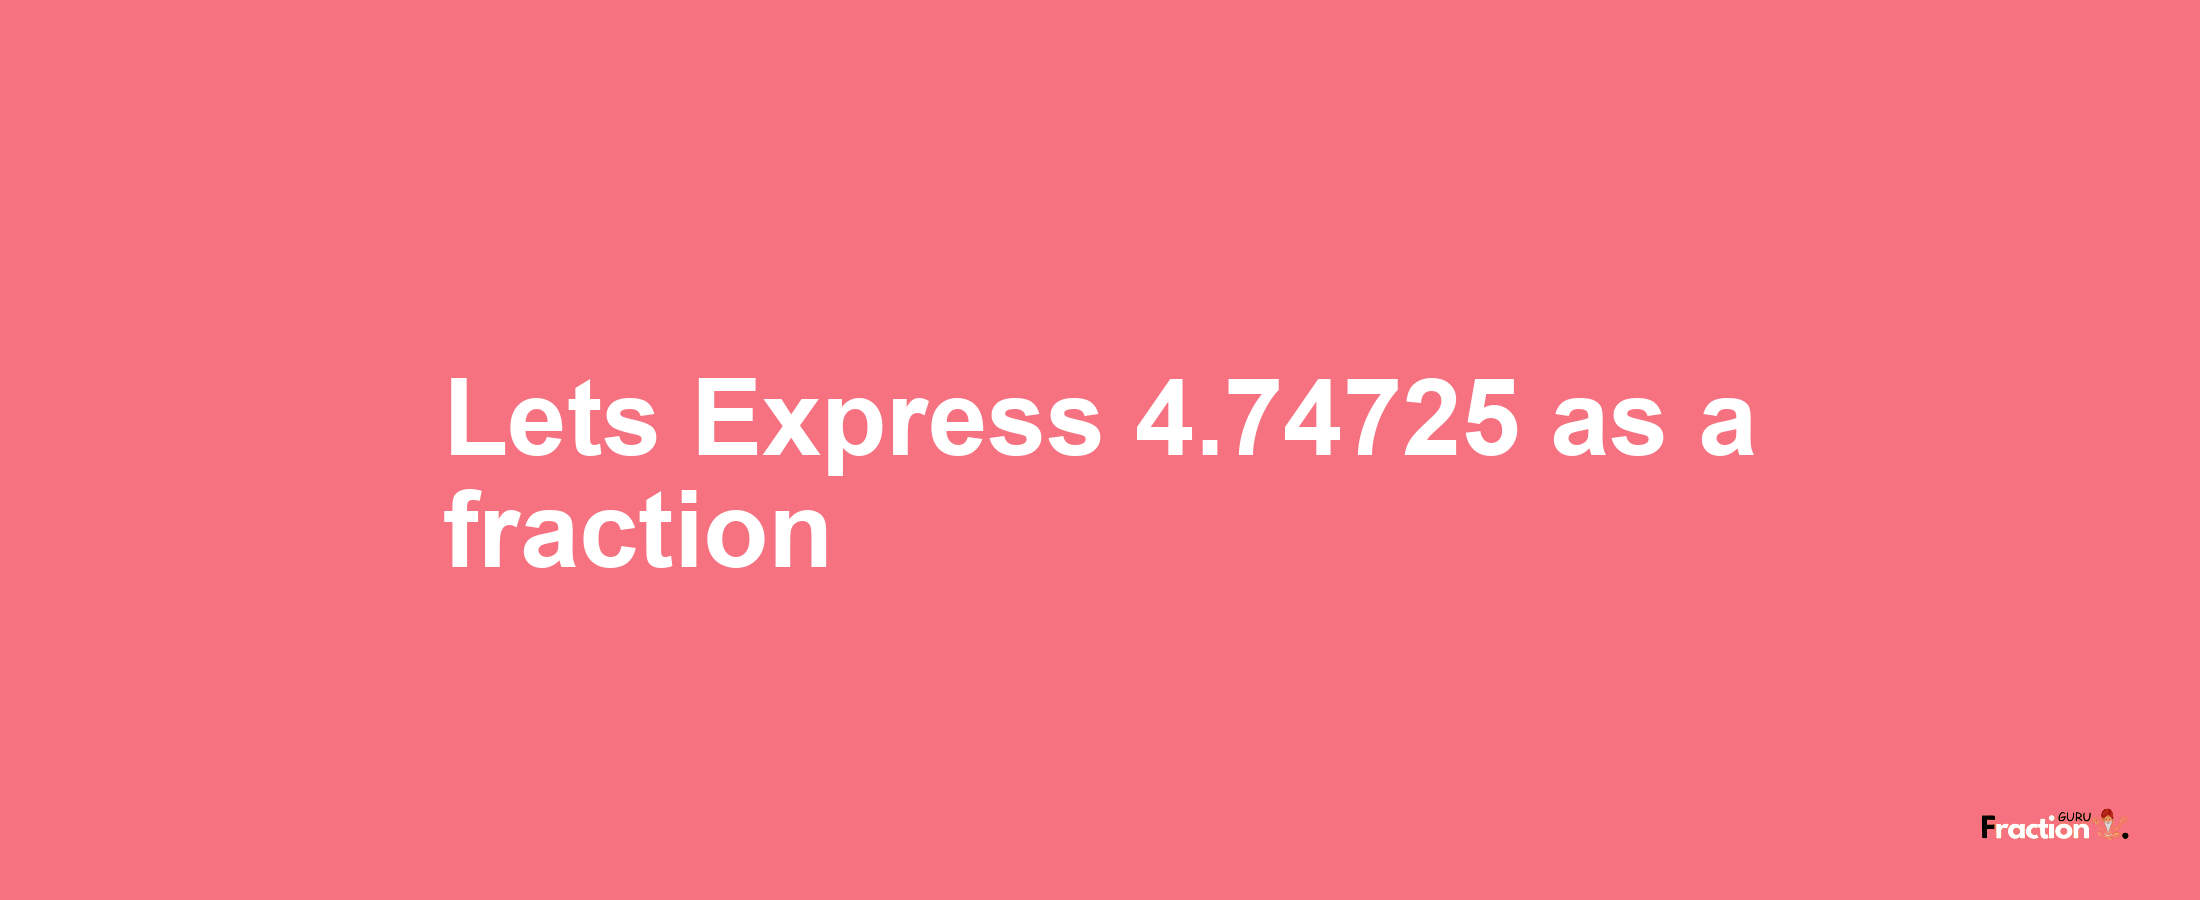 Lets Express 4.74725 as afraction